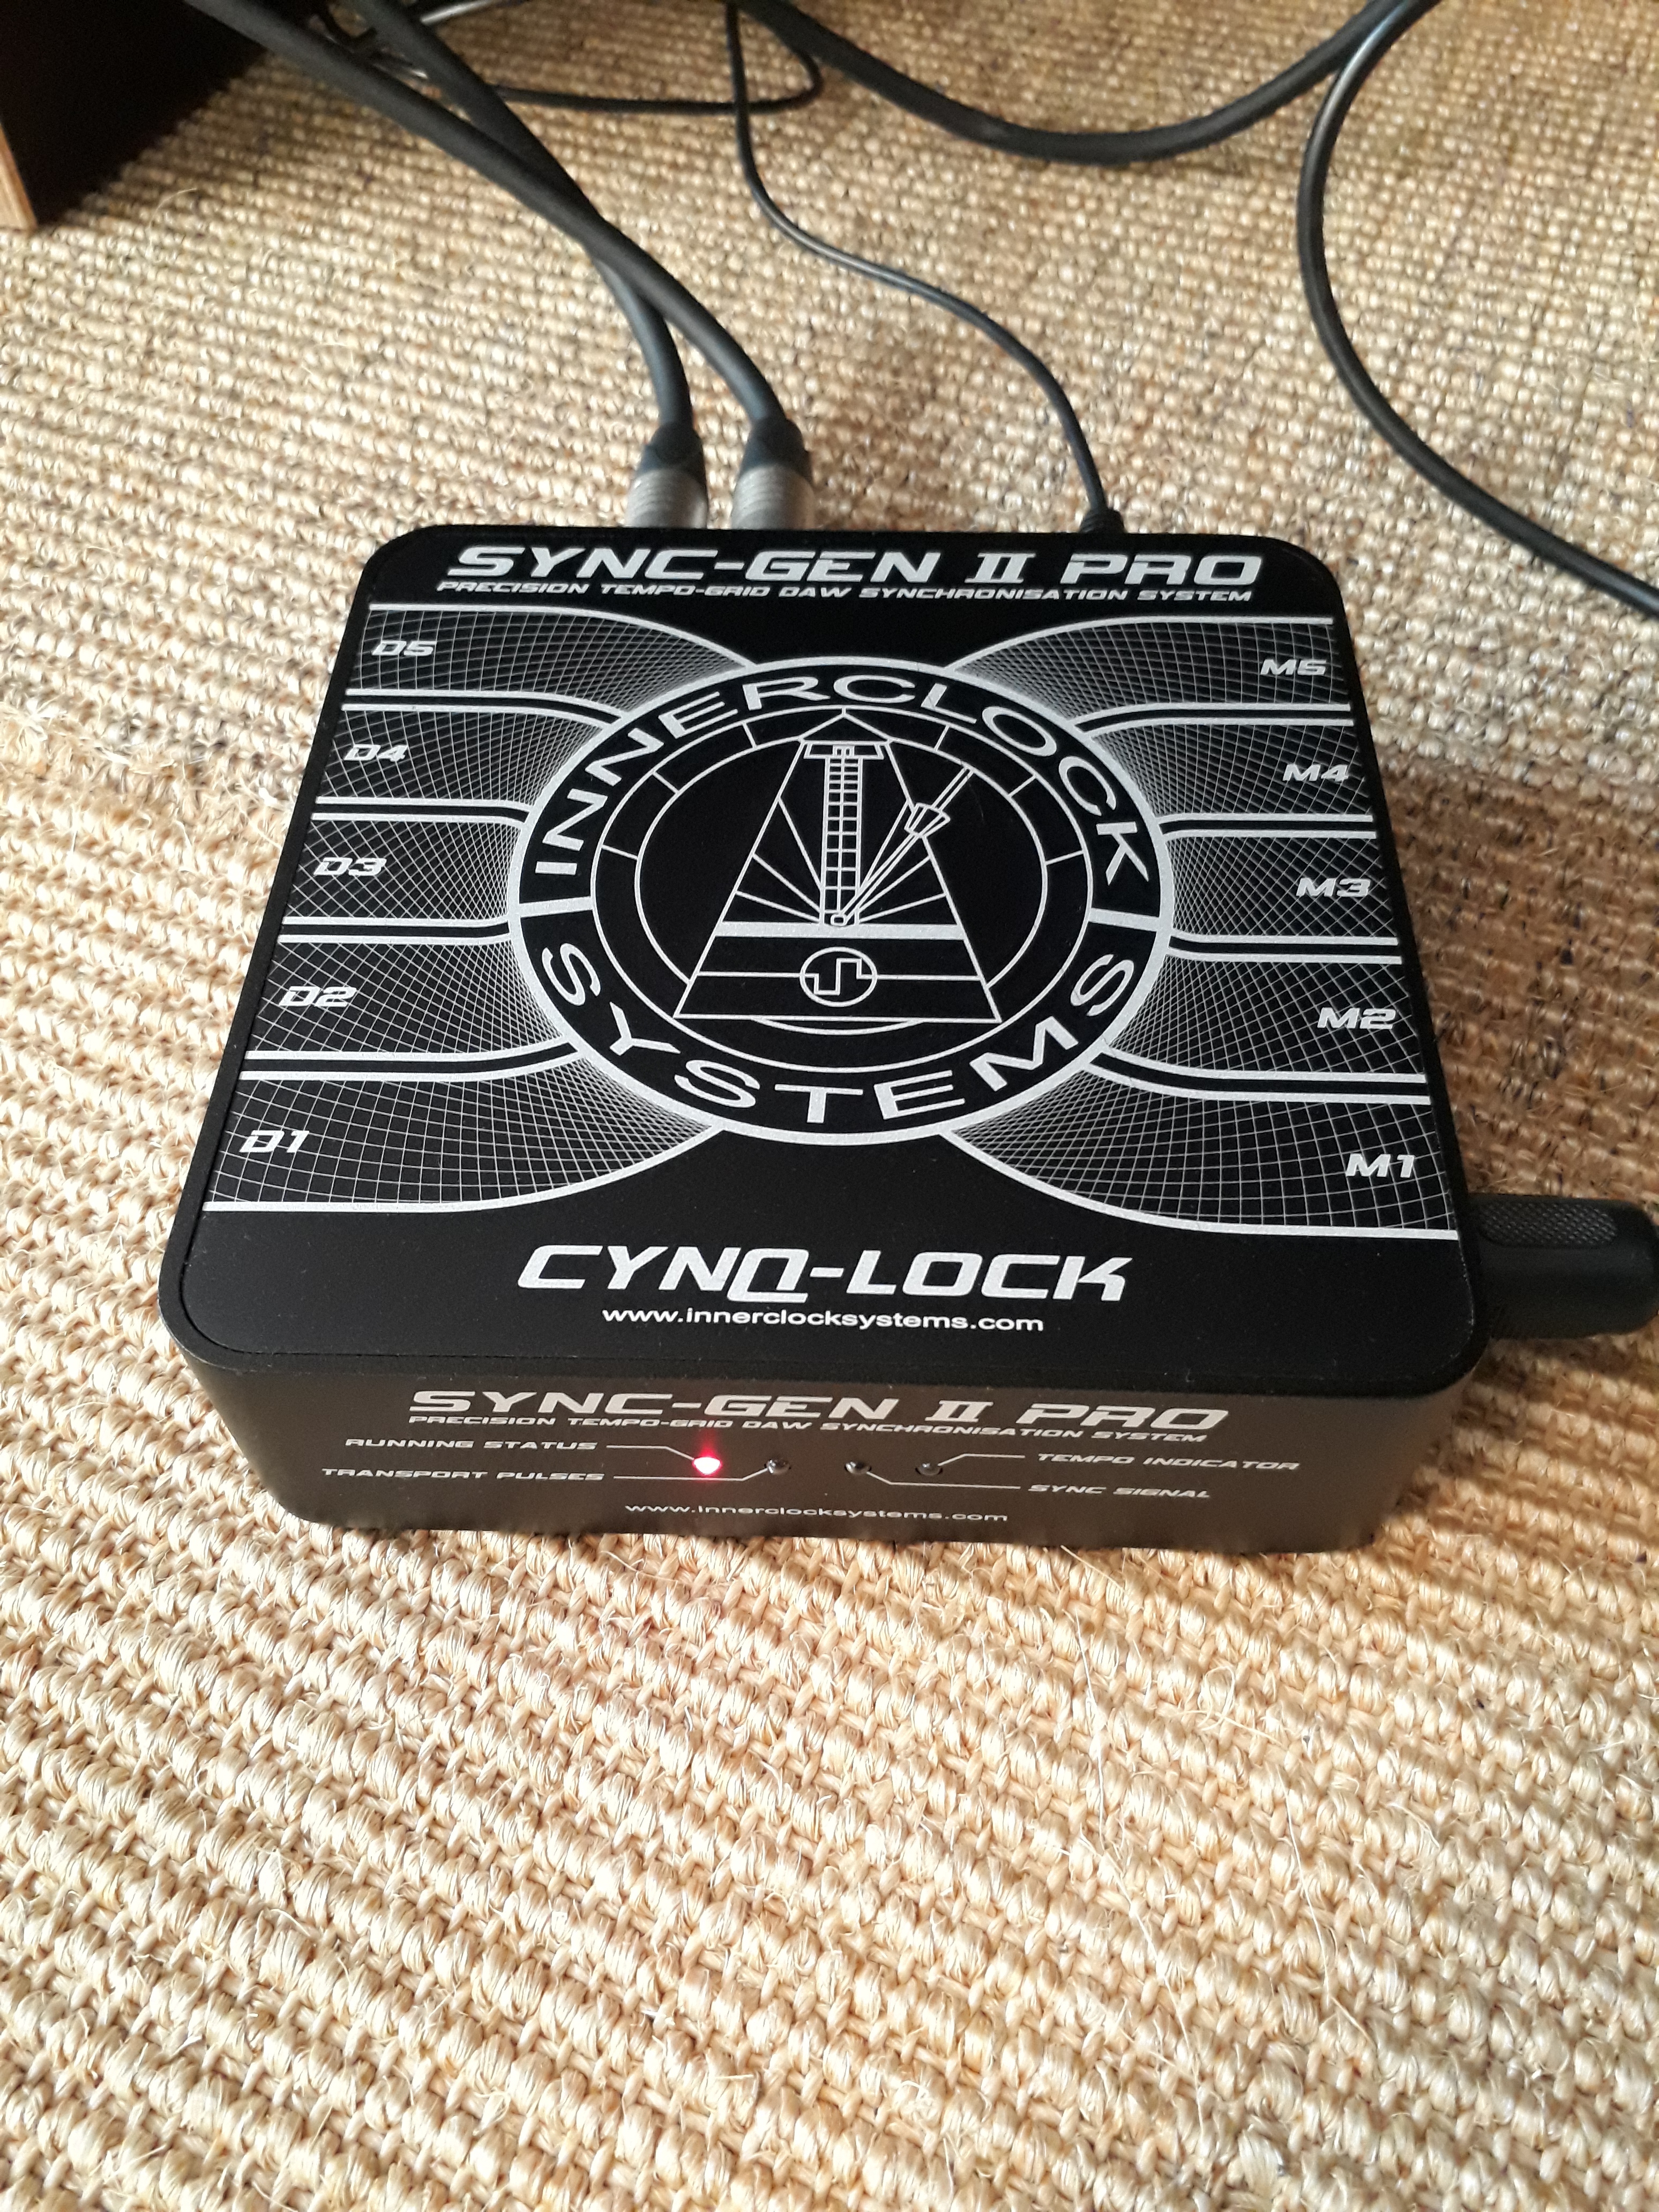 innerclock systems sync gen or multiclock